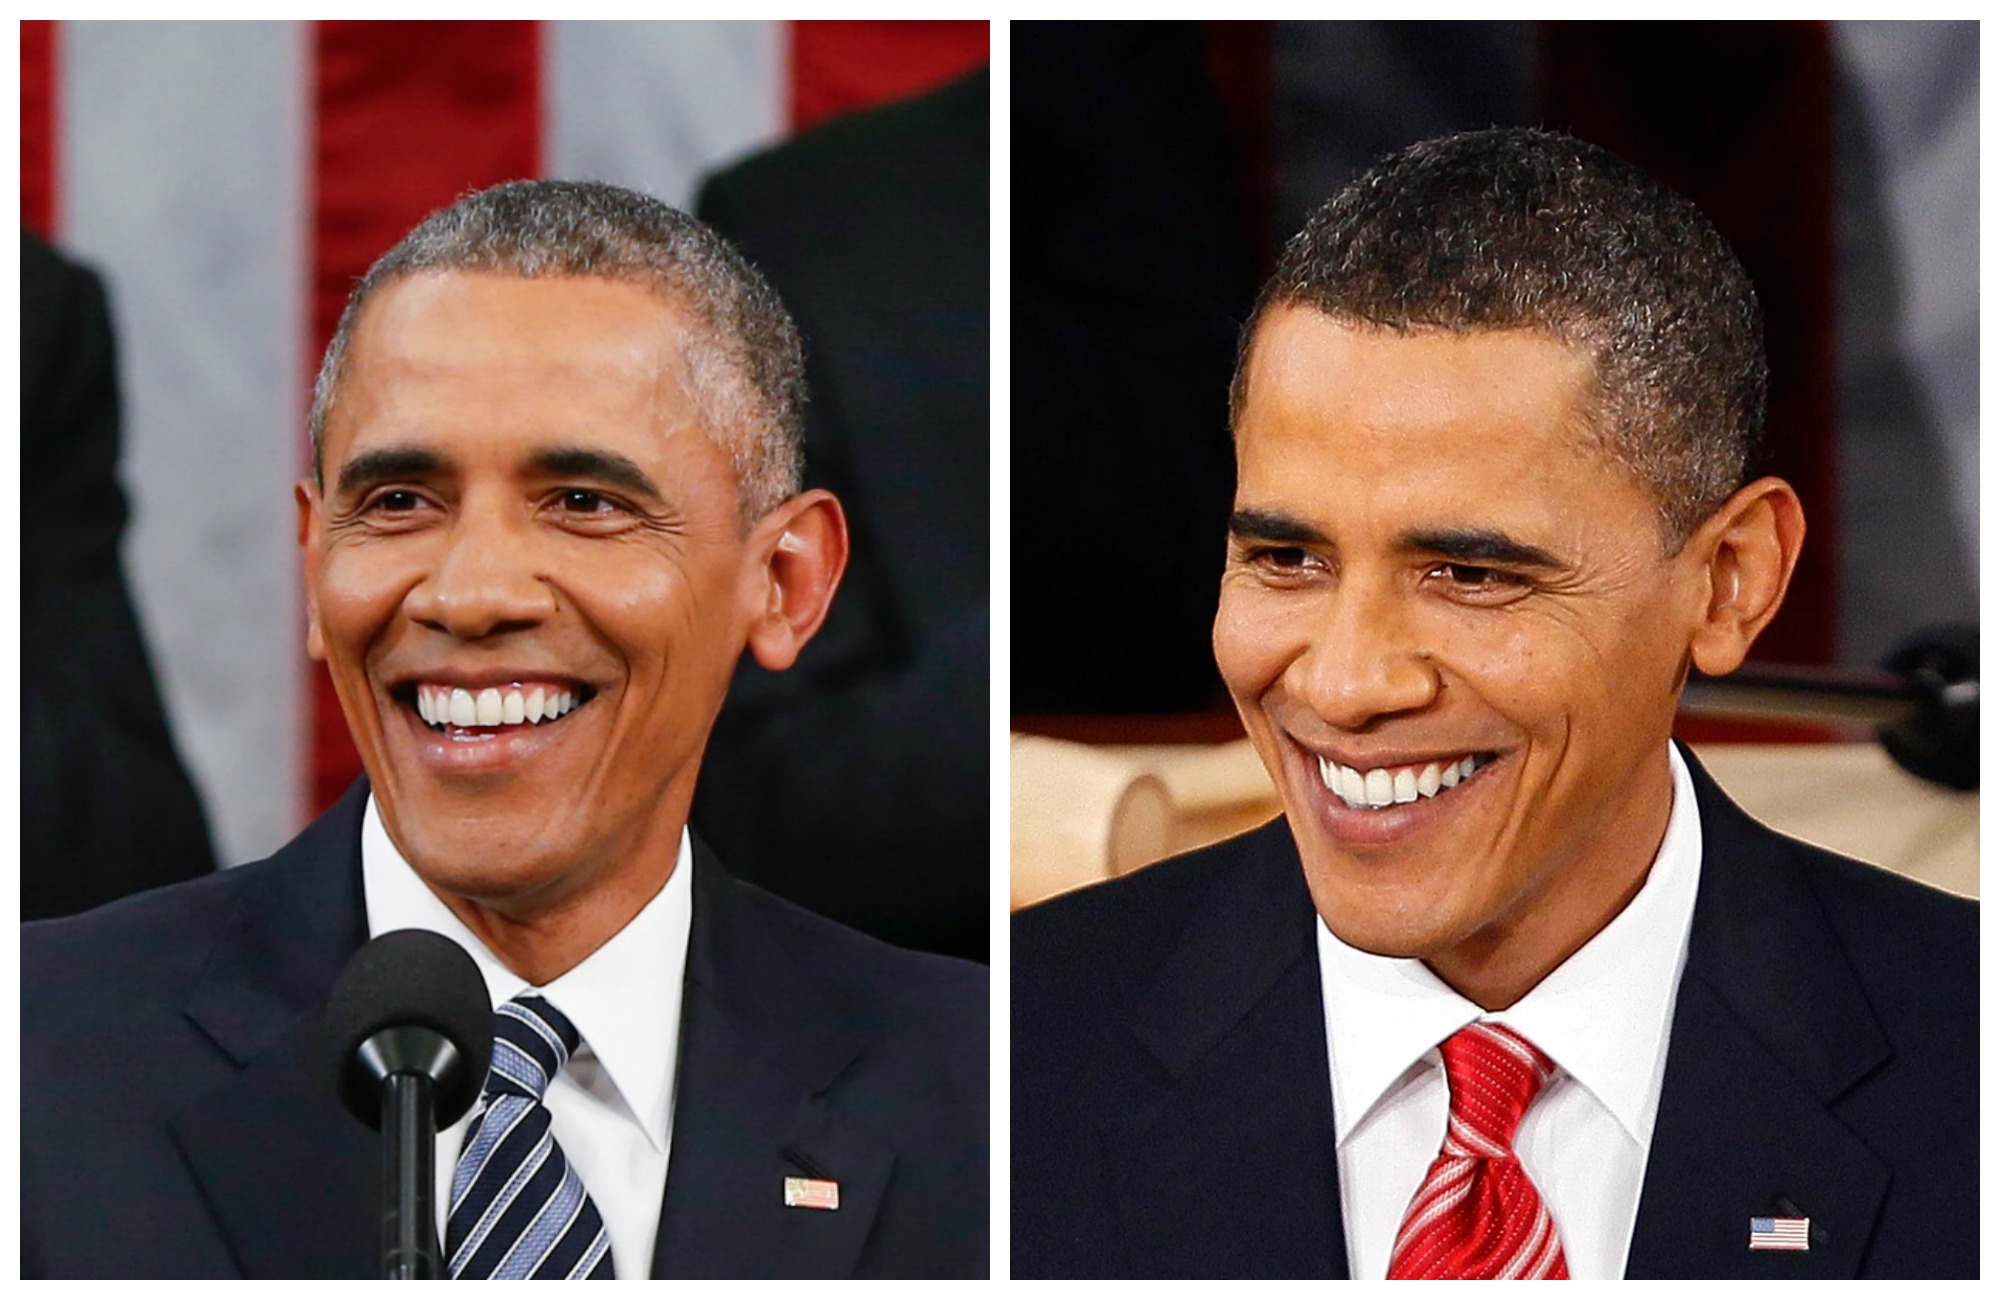 President Obama at the State of the Union in 2016 and back in 2010. (Credit: Getty Images)